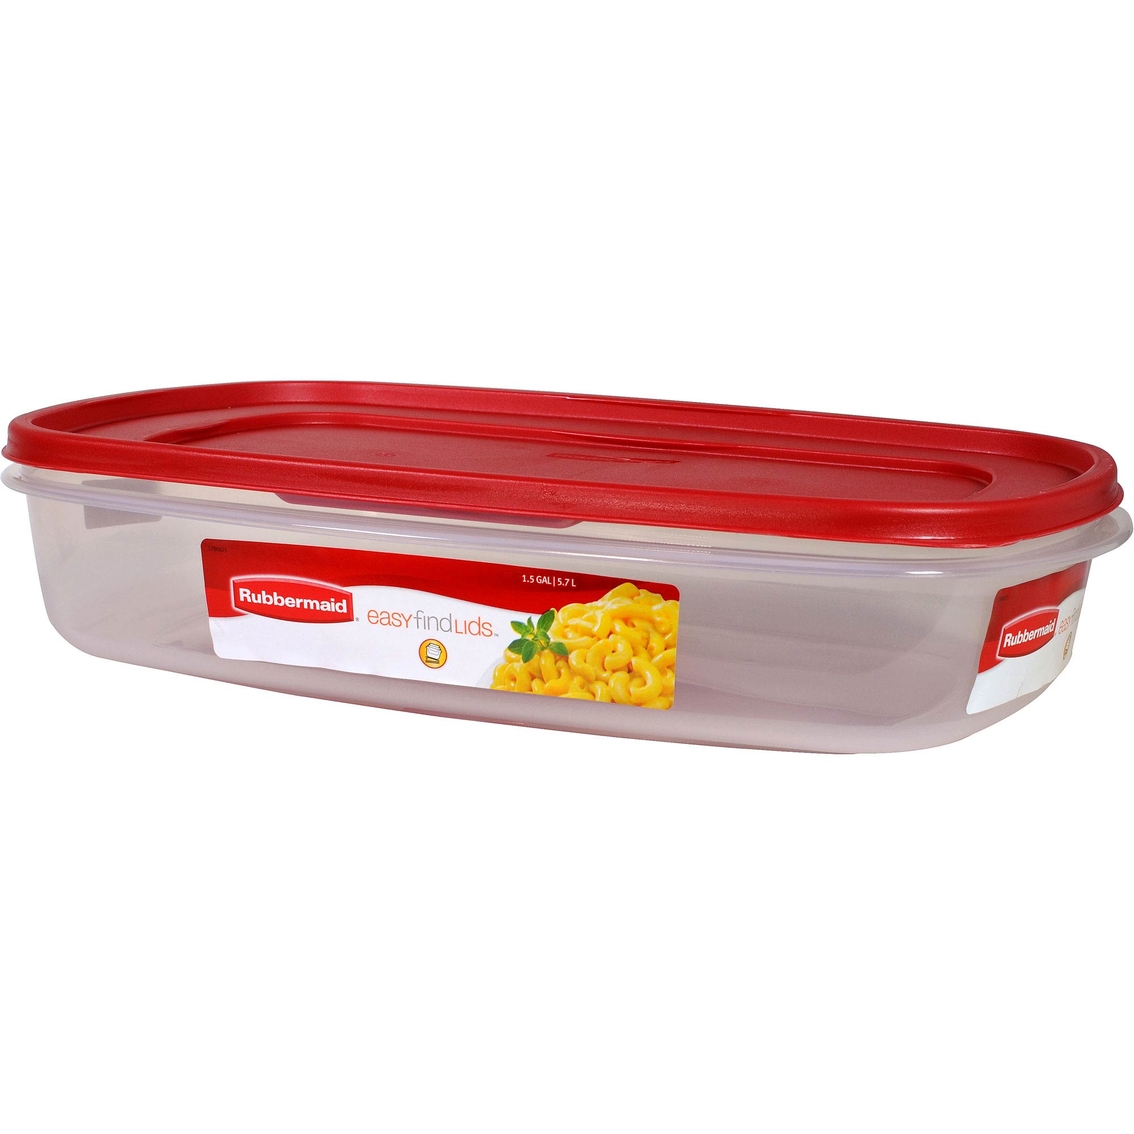  Rubbermaid Easy Find Lids Food Storage Containers